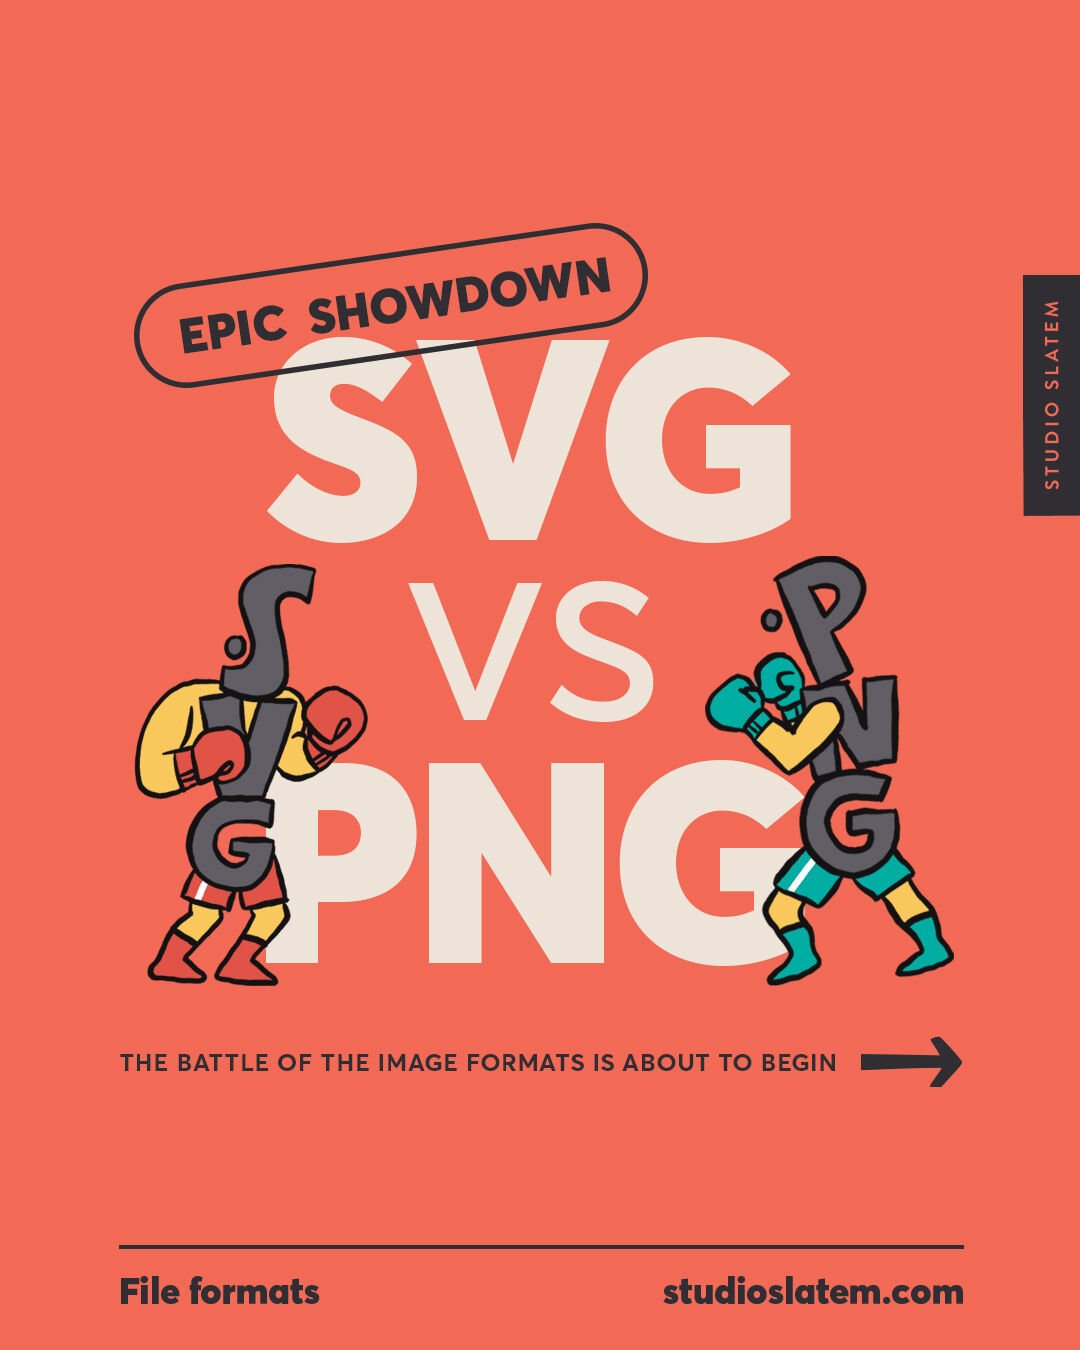 📣 It'sssss the EPIC SHOWDOWN between the two heavy-weight web-specific file formats: SVG vs PNG!​​​​​​​​​ 📣

Who will reign champion in this nail-biting head-to-head?!

Swipe across as we join in LIVE from the arena of CHAMMMMMPPPPIIIIOOONS!

#svgv